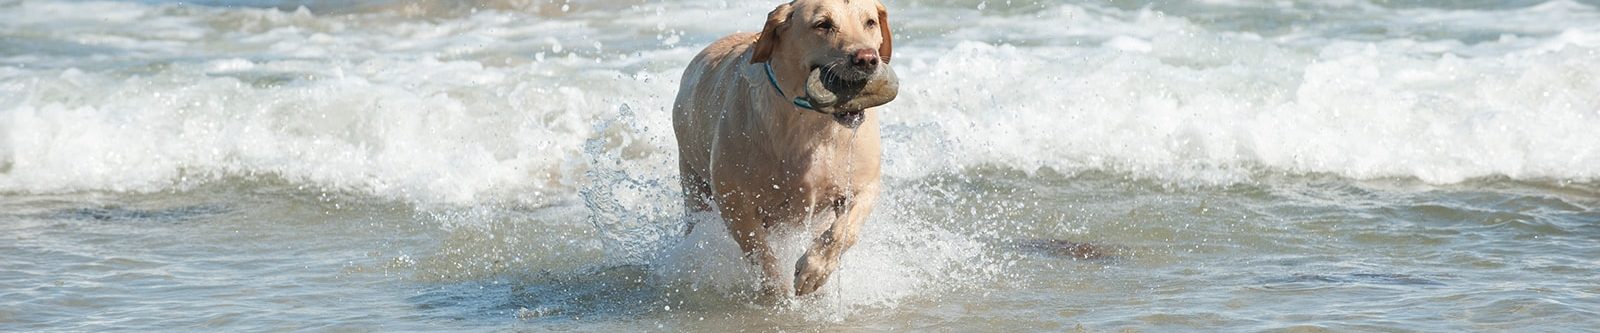 dog playing in the sea carrying a stone